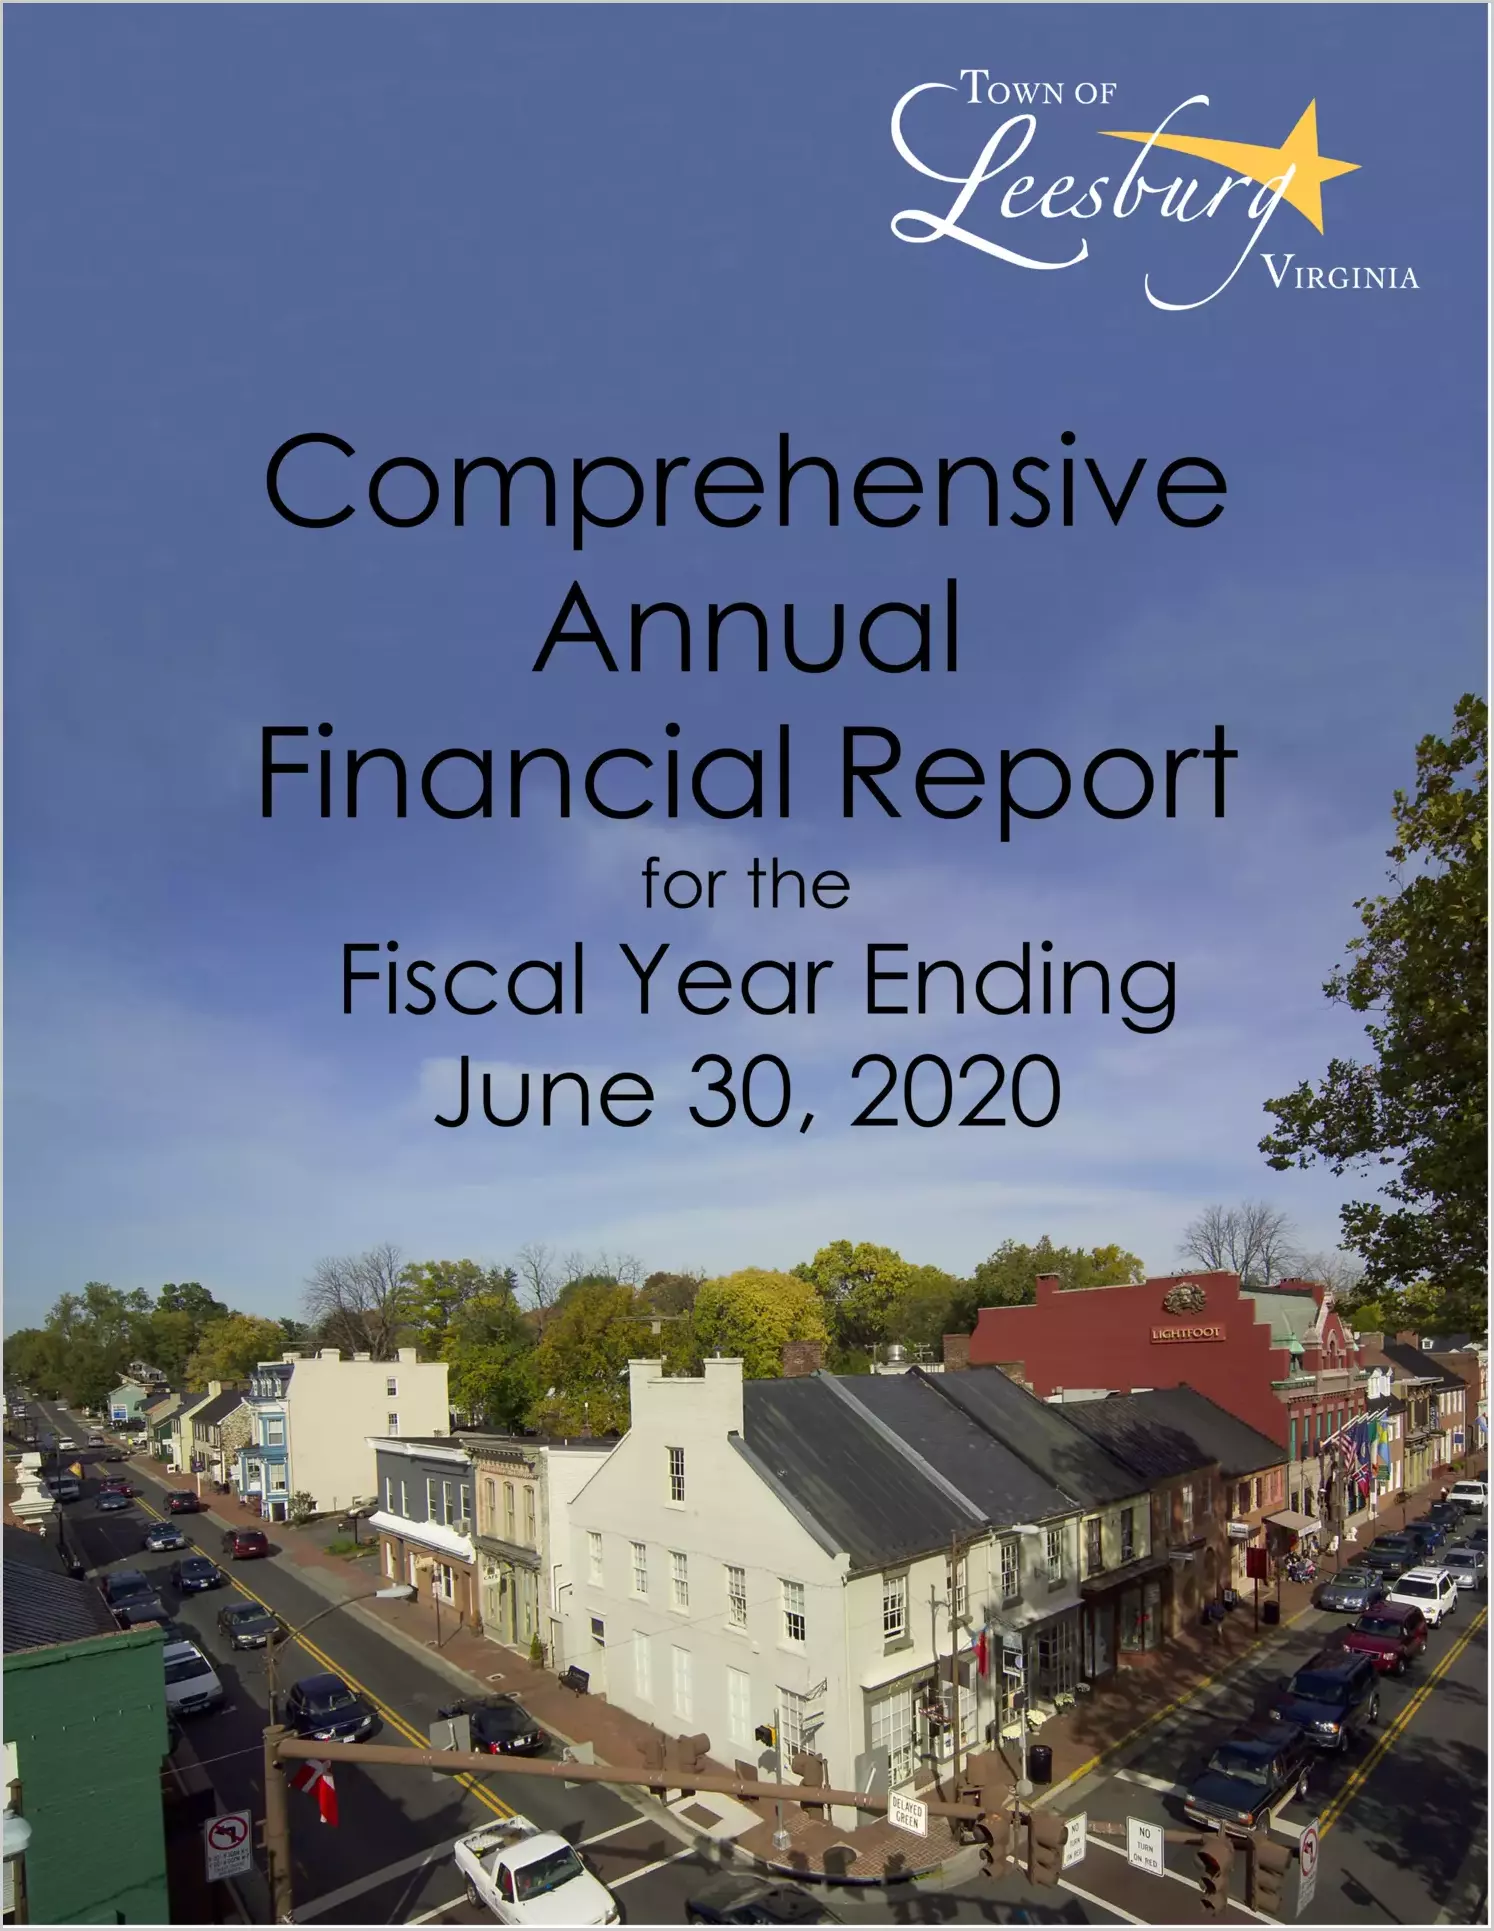 2020 Annual Financial Report for Town of Leesburg